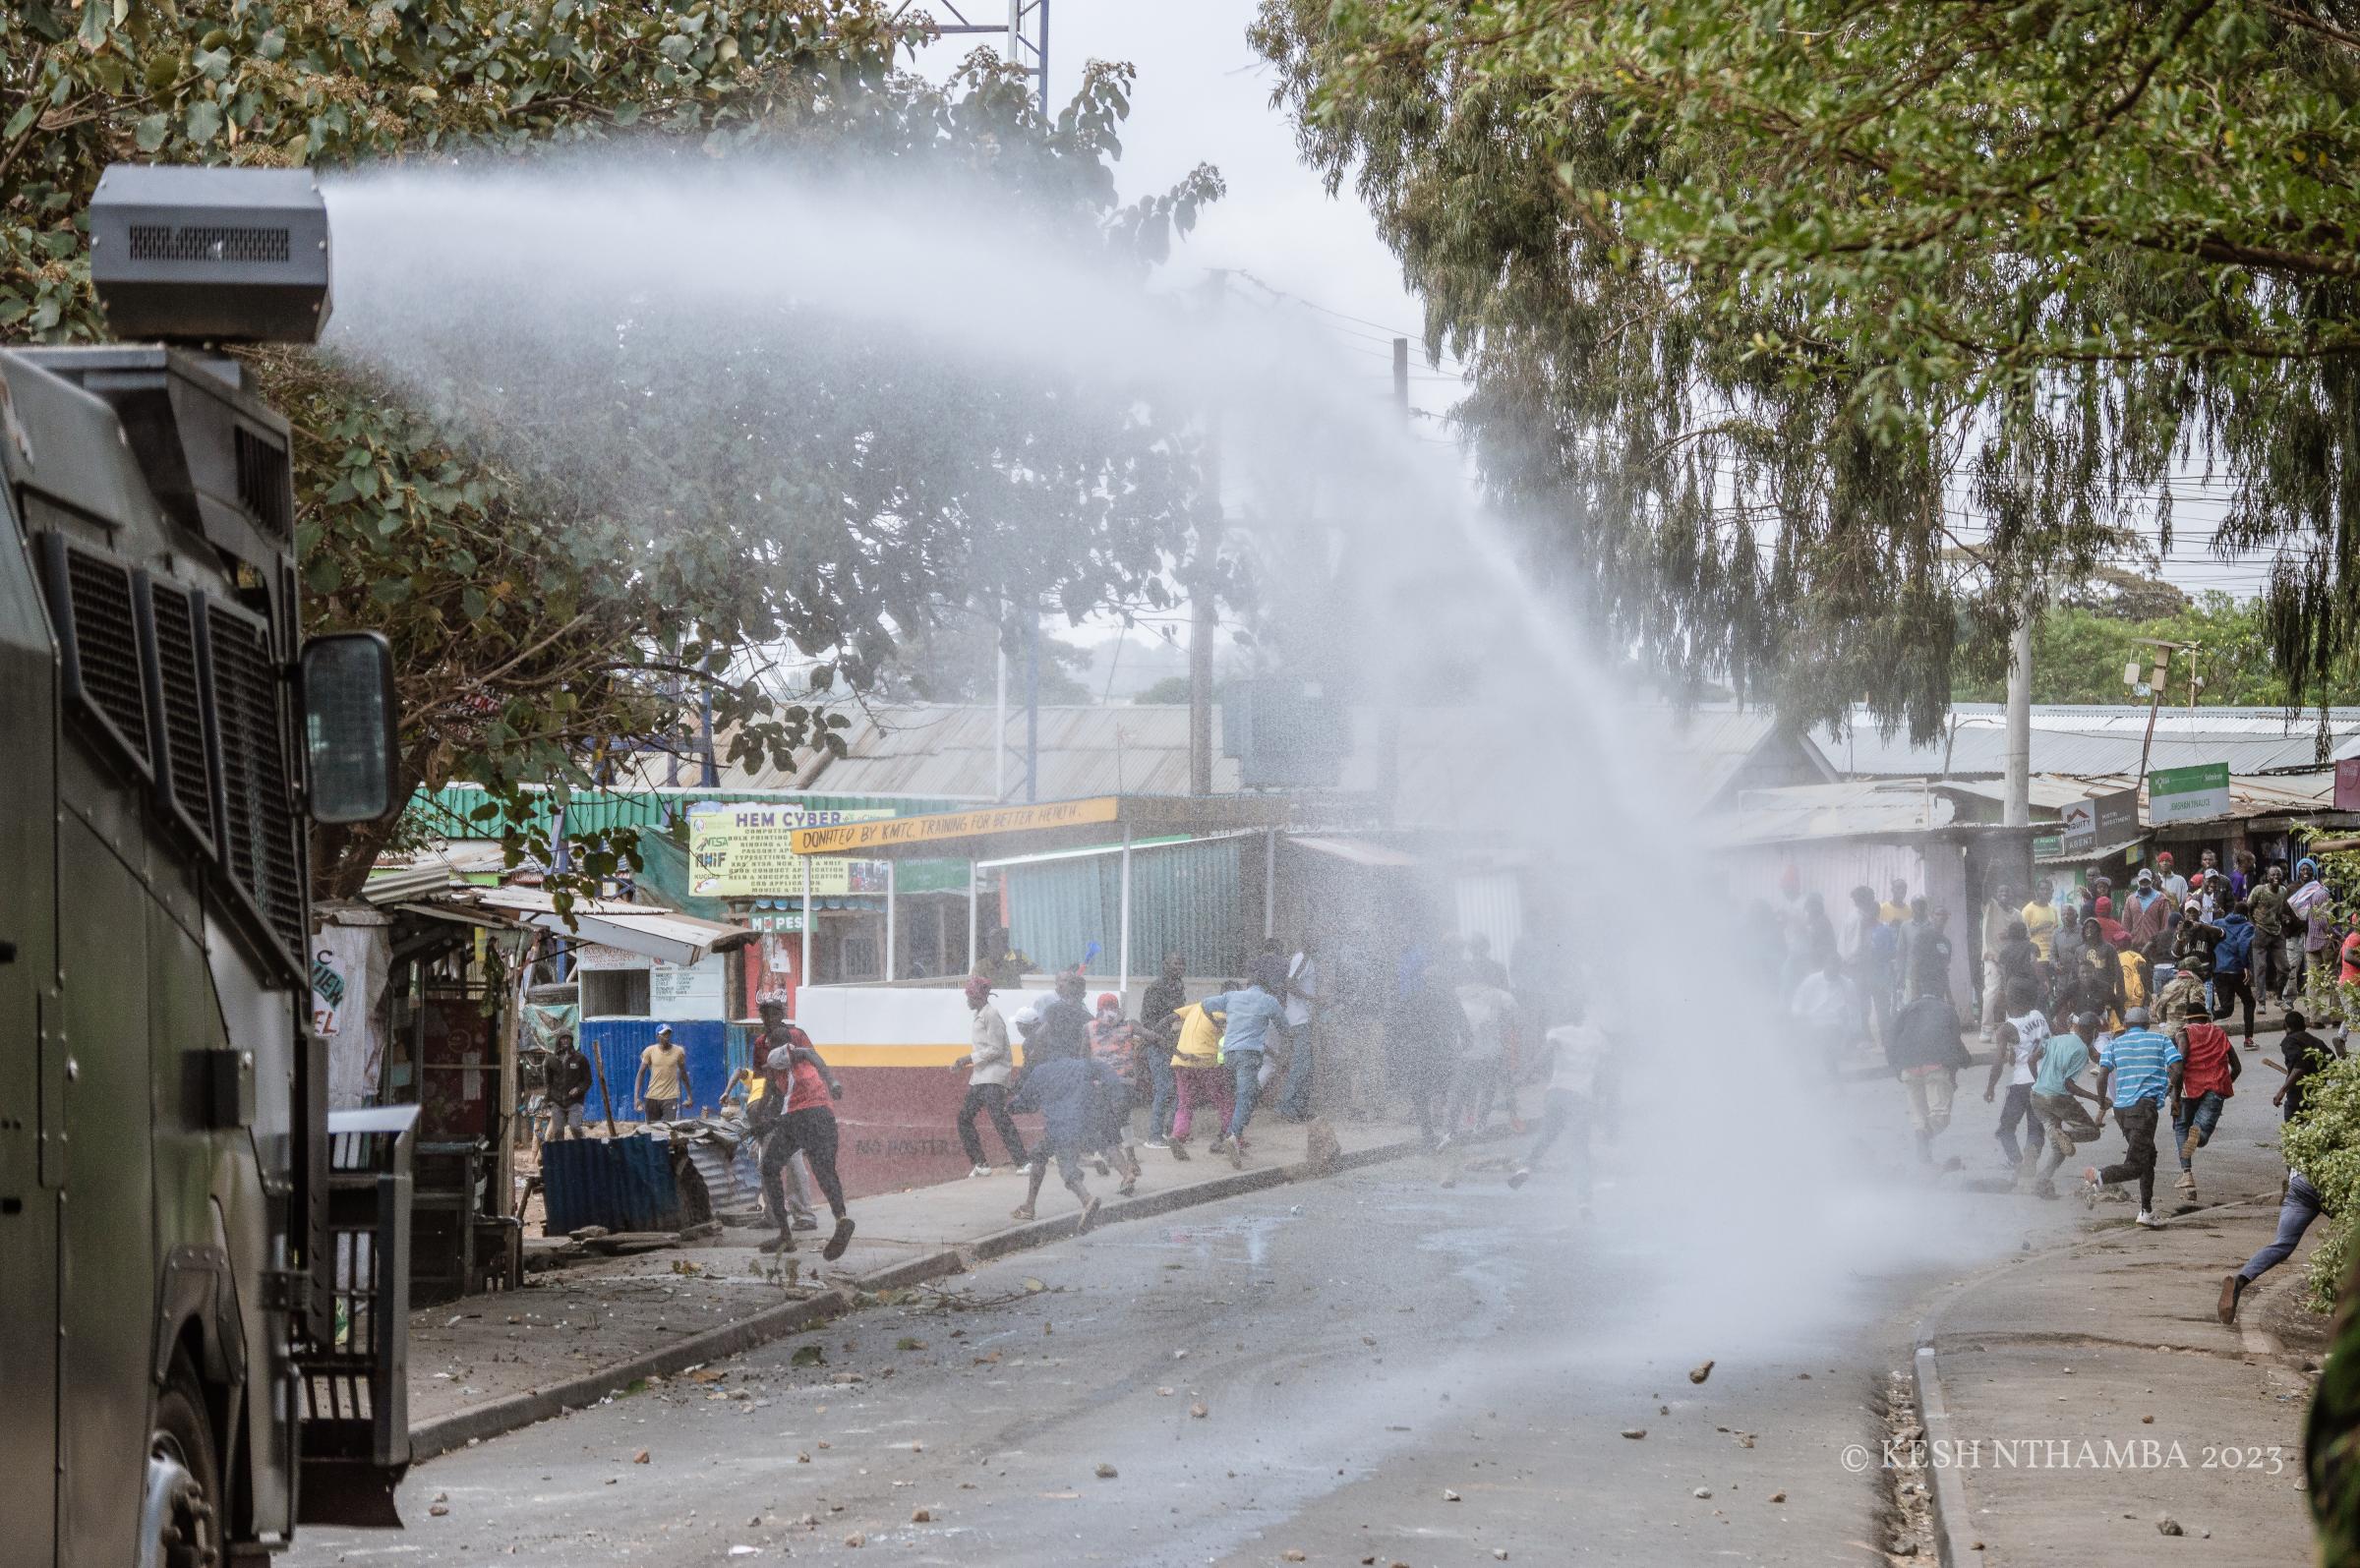 Anti-government Kibera Protests - Police spray a water cannon to disperse protestors during...